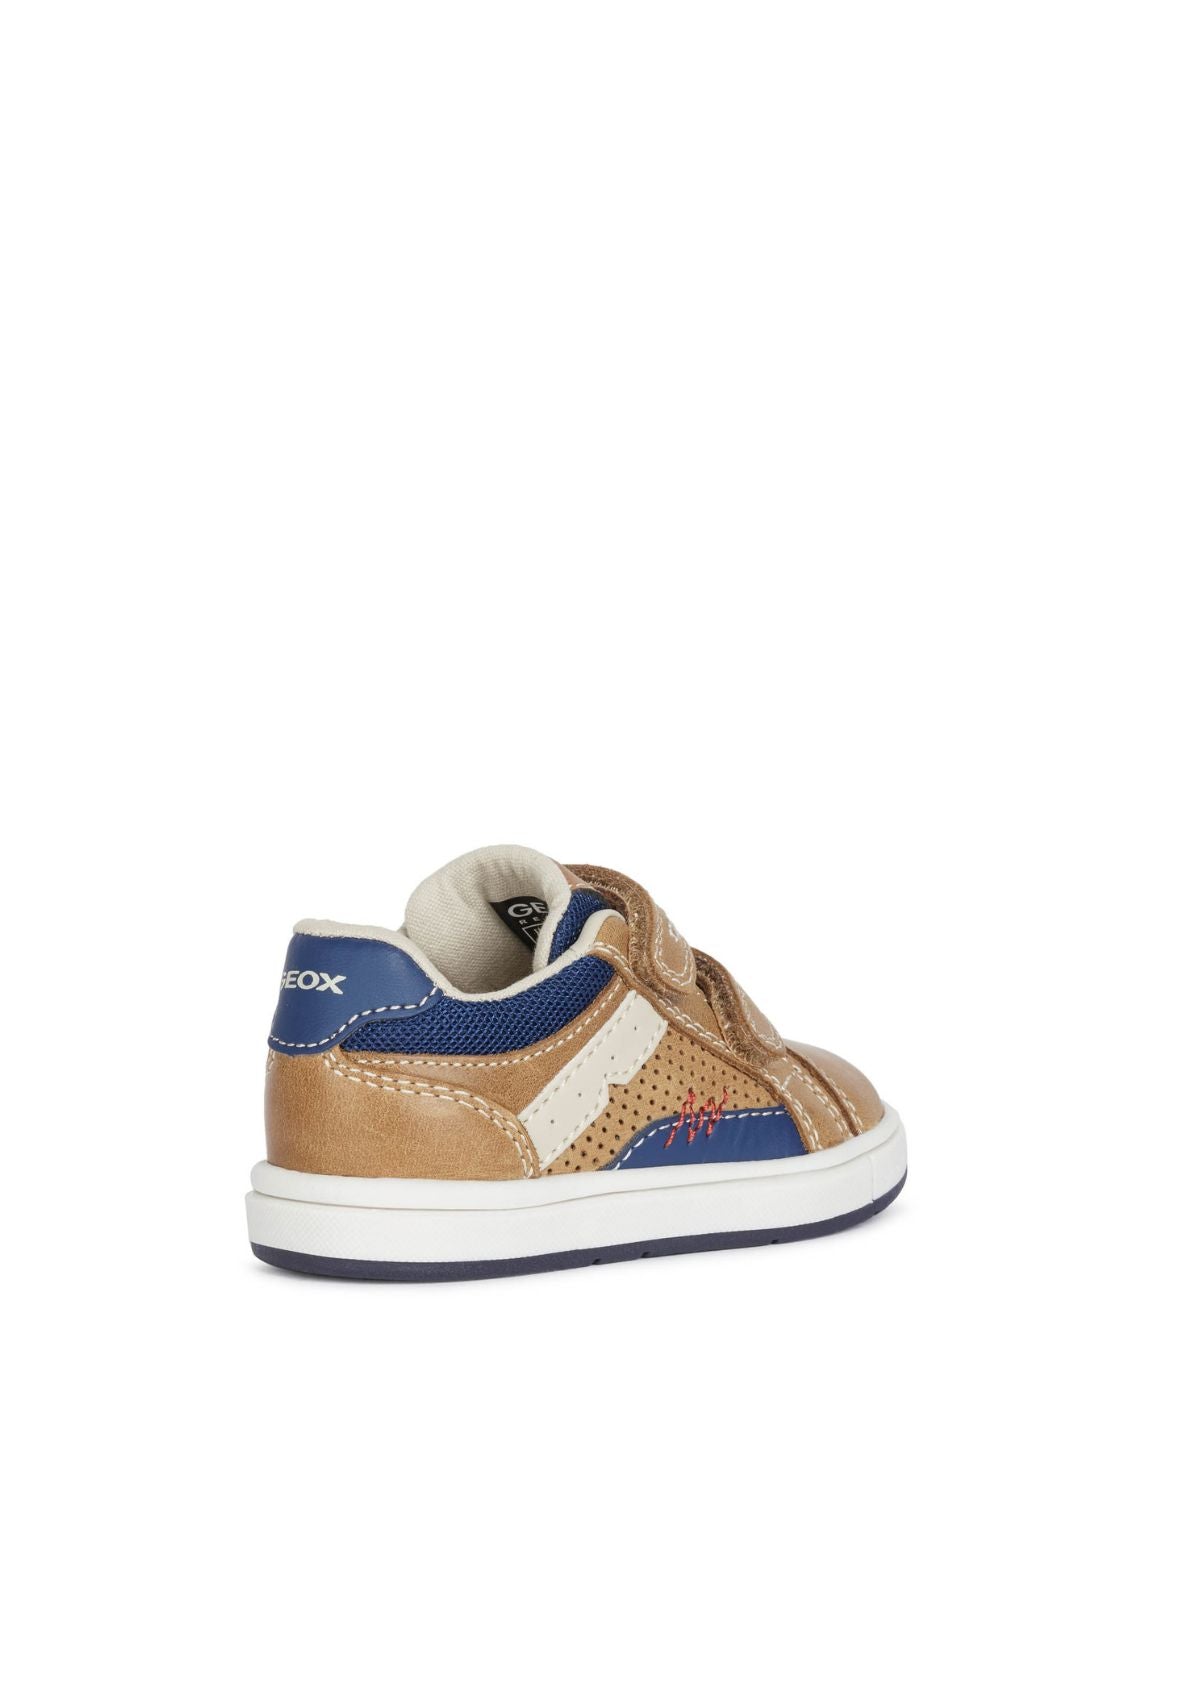 Geox Baby Boys Trainers TROTTOLA Caramel Navy side back